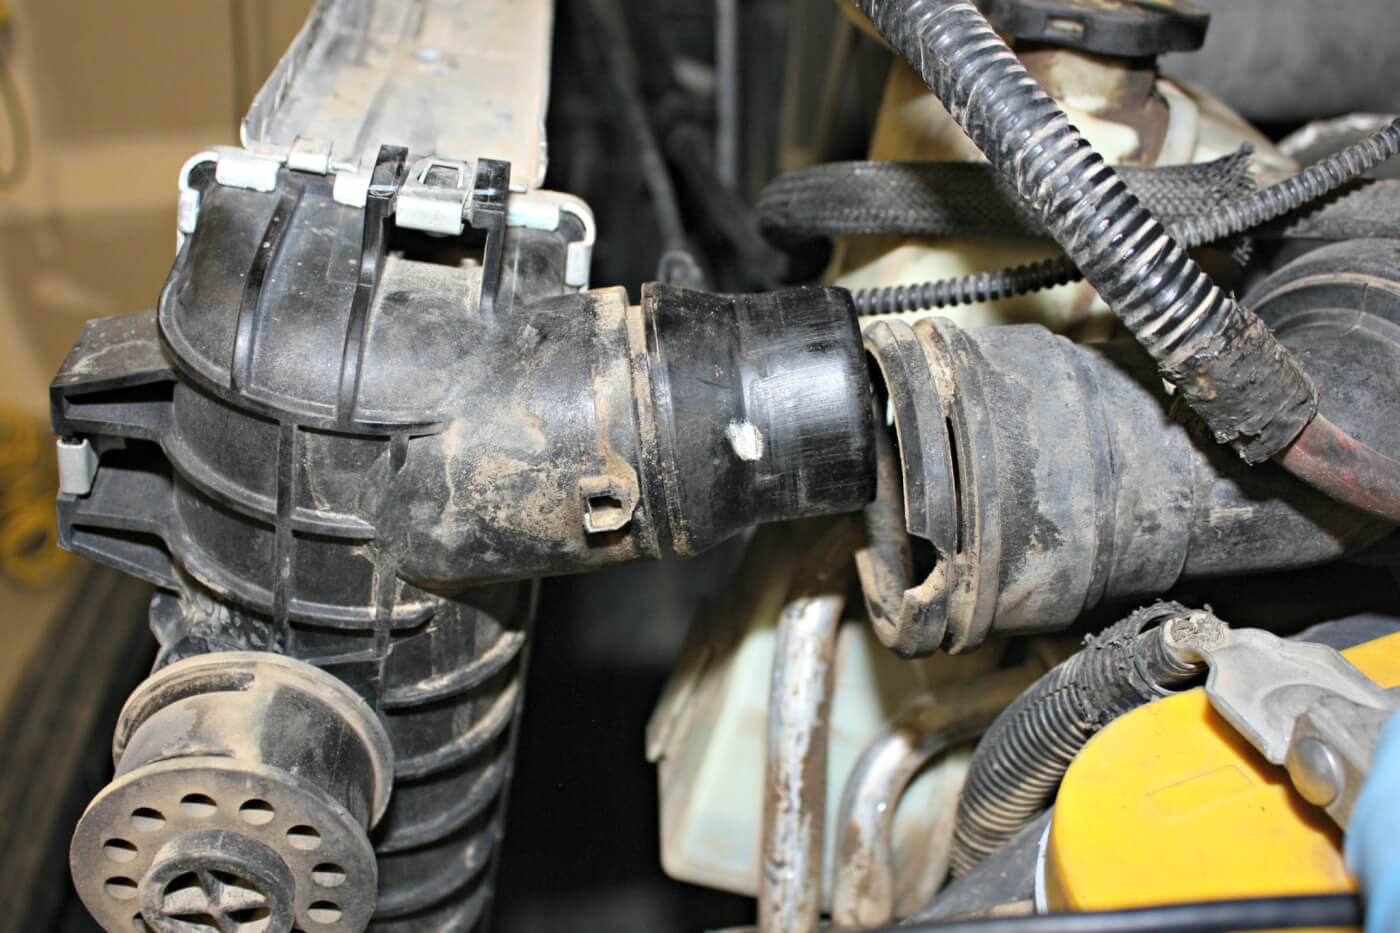 9. The factory coolant hoses can be disconnected from the radiator by simply sliding out the small metal U-clips with some pliers. Even though the radiator was drained, the lower radiator hose will still be full of coolant, so by disconnecting it from the radiator and not the engine, you should be able to avoid taking an antifreeze bath.